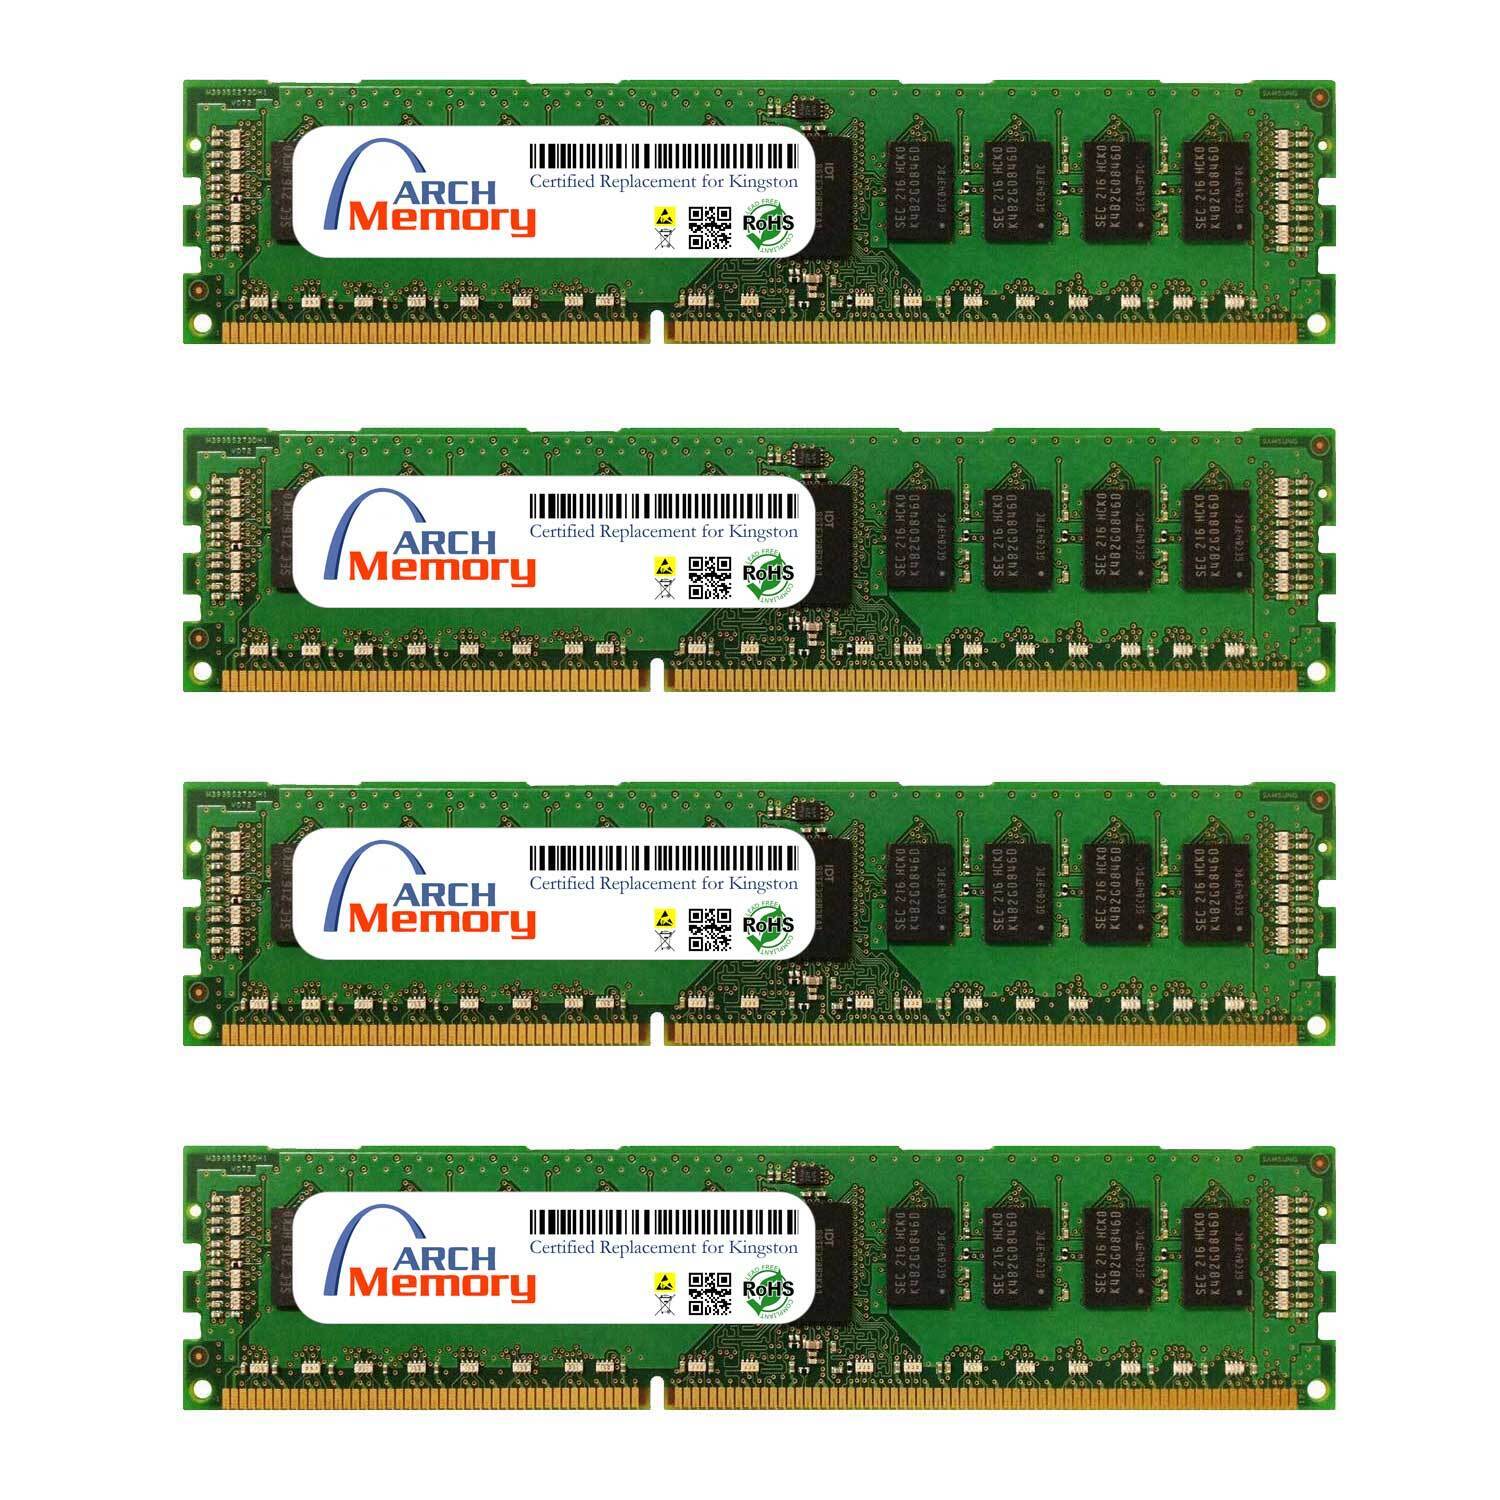 Arch Memory KTH-PL316EK4/32G 8GB Replacement for Kingston DDR3 UDIMM RAM